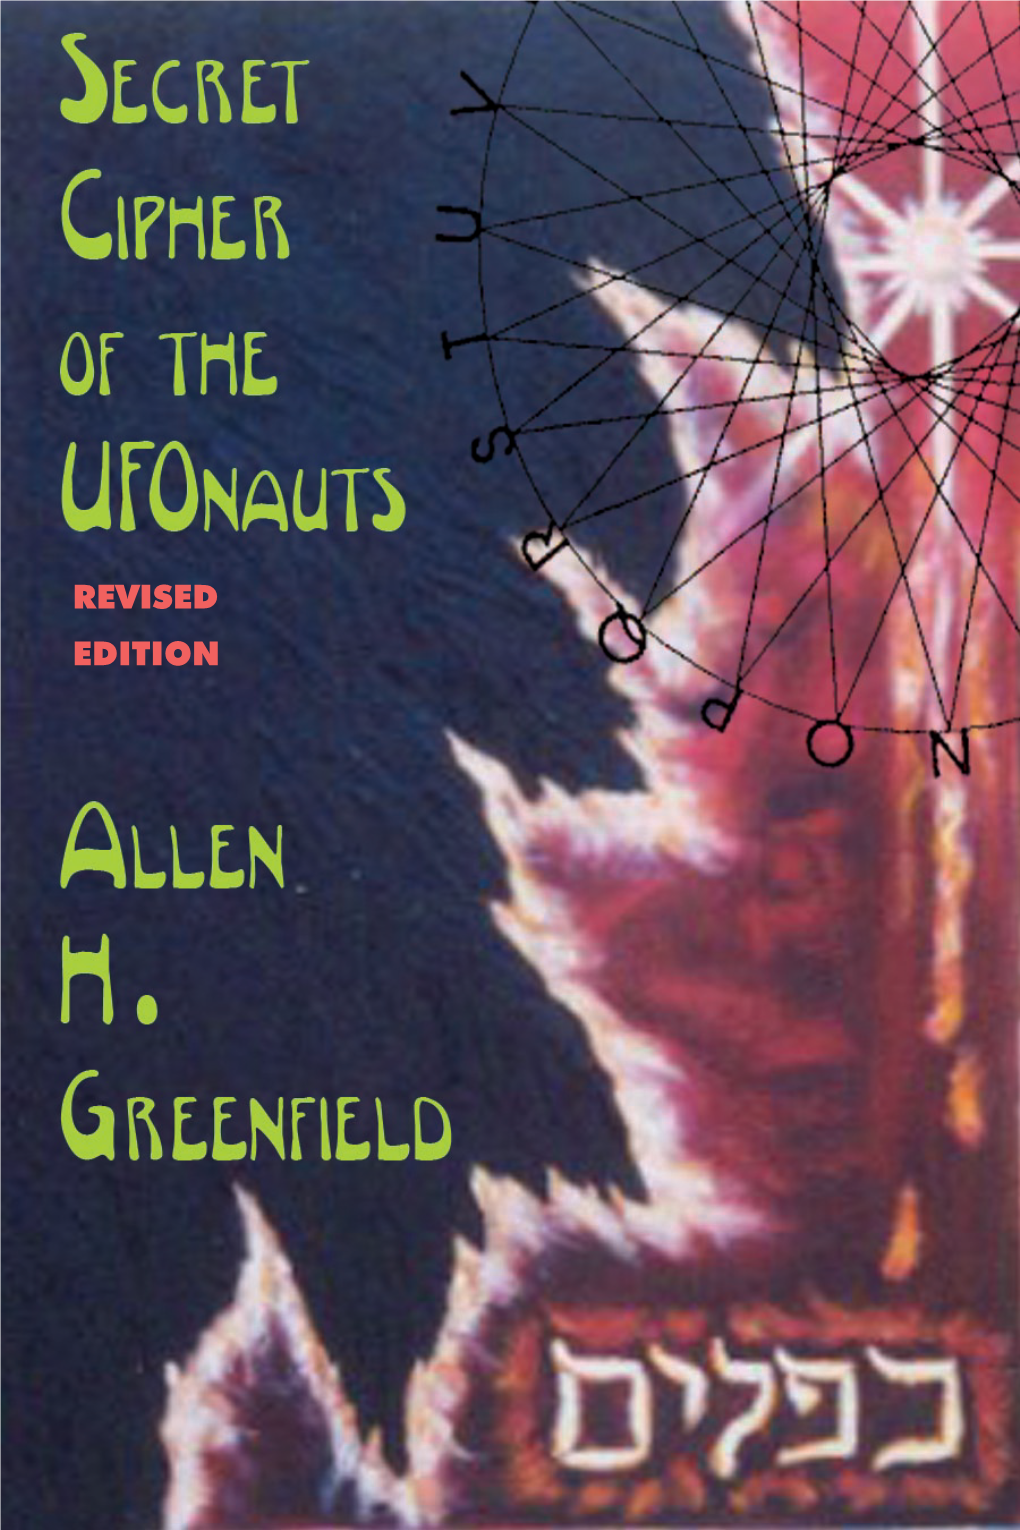 A Complimentary Chapter from Secret Cipher of the Ufonauts by Allen